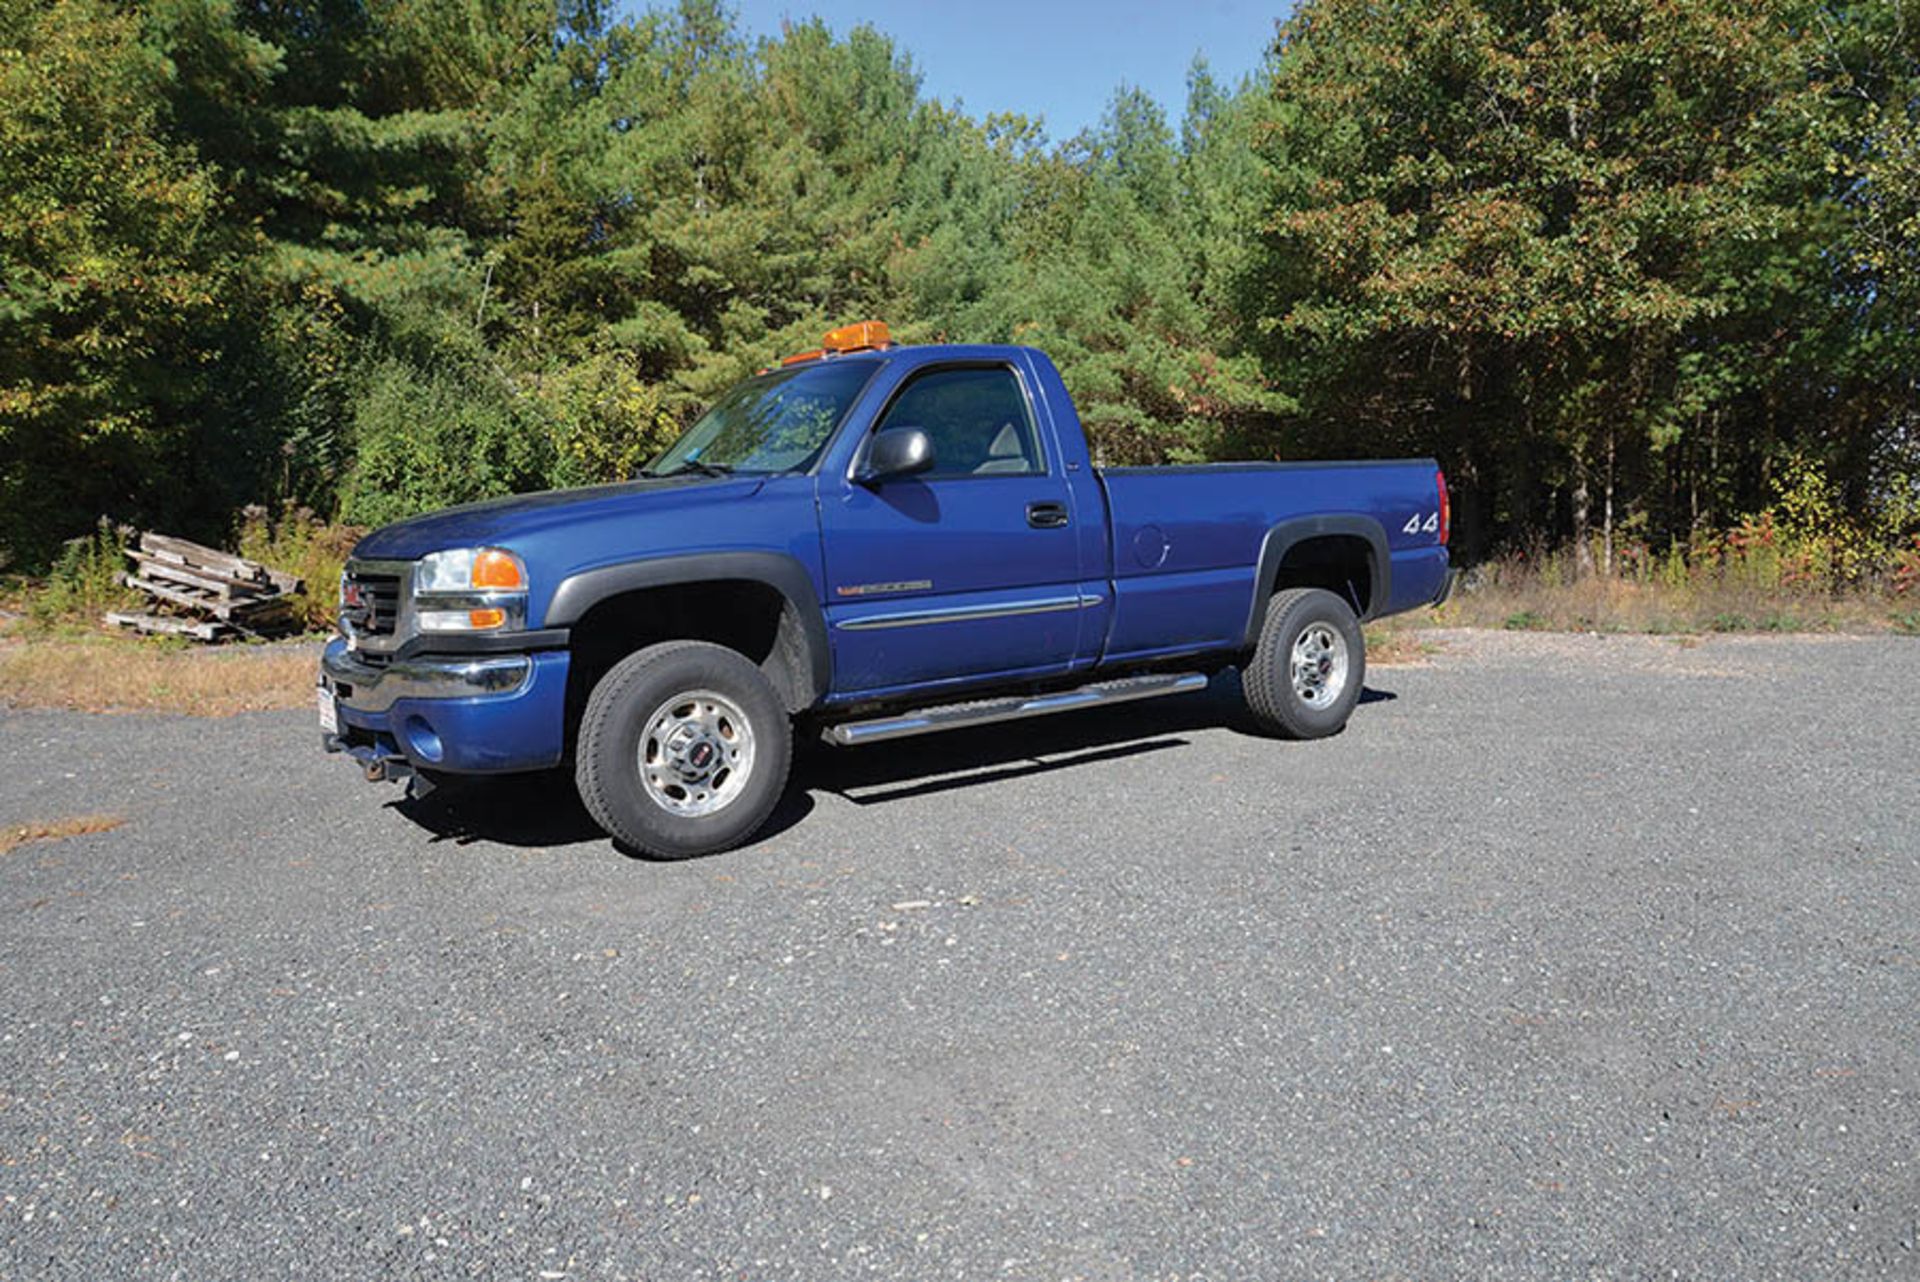 2003 GMC SIERRA 2500HD PICKUP TRUCK, 4 X 4, 8' BED, CHROME RUNNING BOARDS - Image 2 of 2